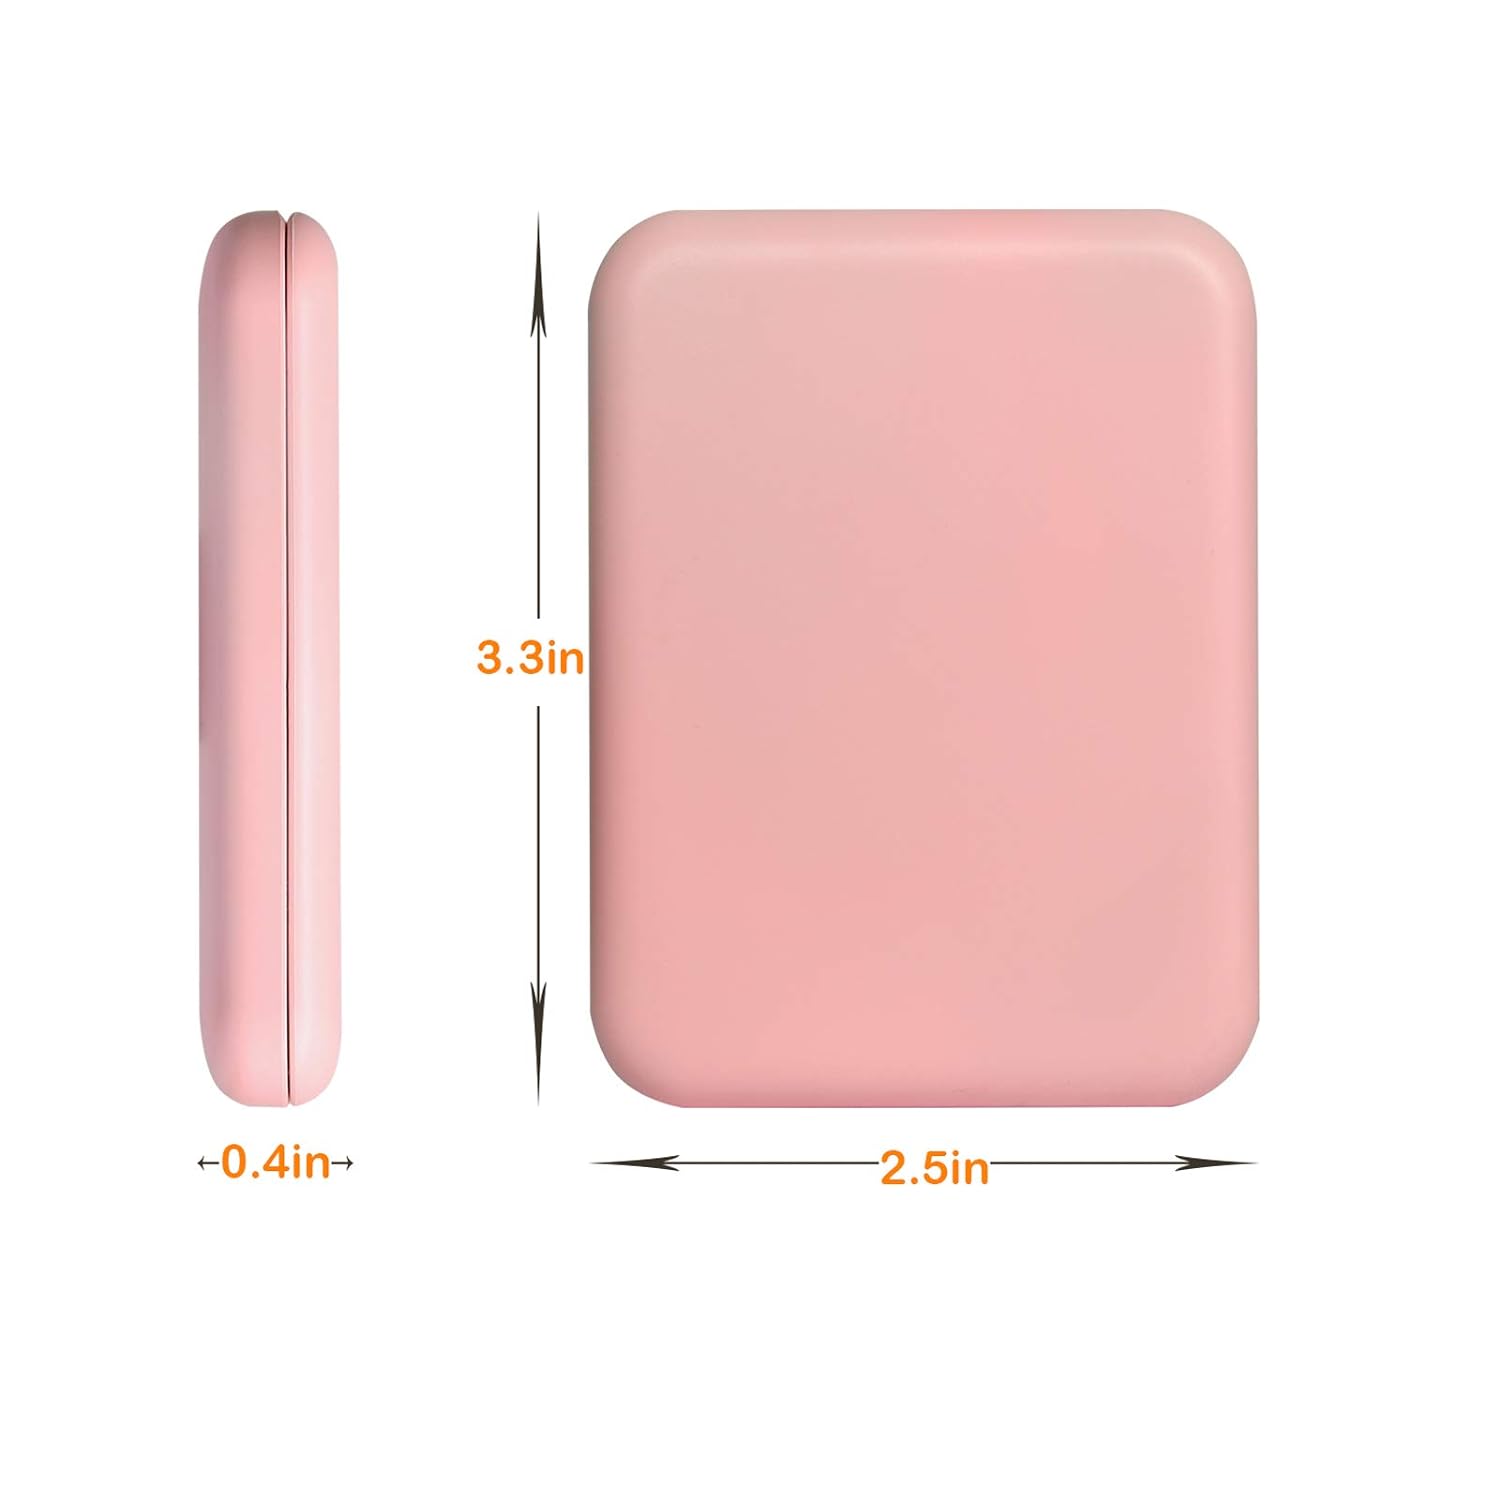 Pocket Mirror LED Compact Travel 2 Sided Makeup Mirror with Light, Pink